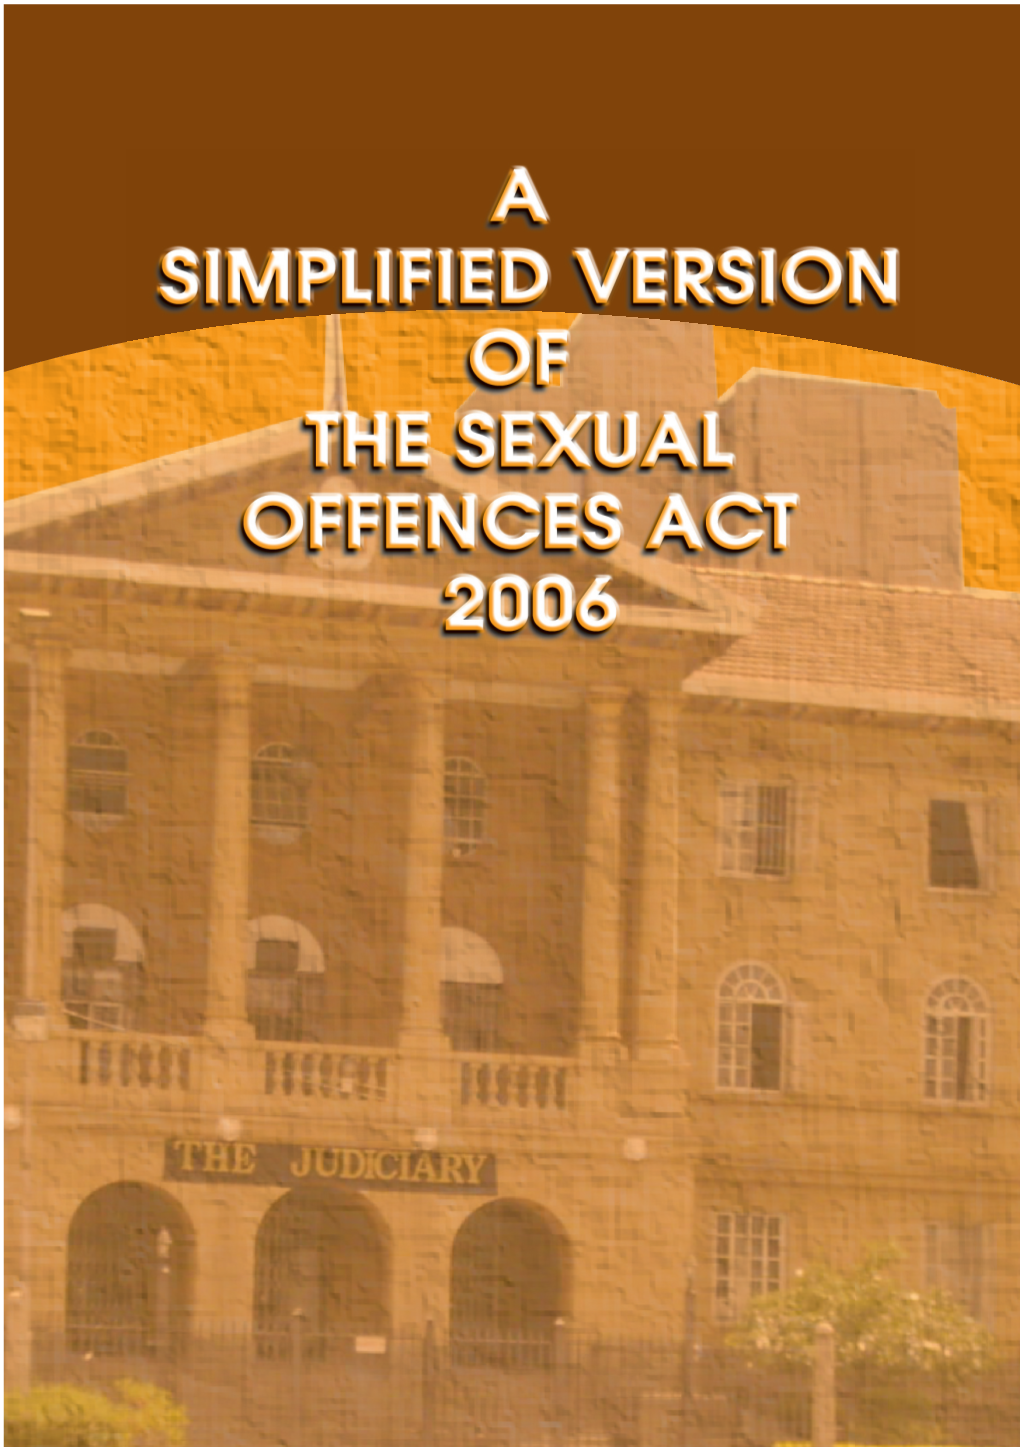 A Popular Version of the Sexual Offence Act 2006 a SIMPLIFIED VERSION of the SEXUAL OFFENCES ACT 2006